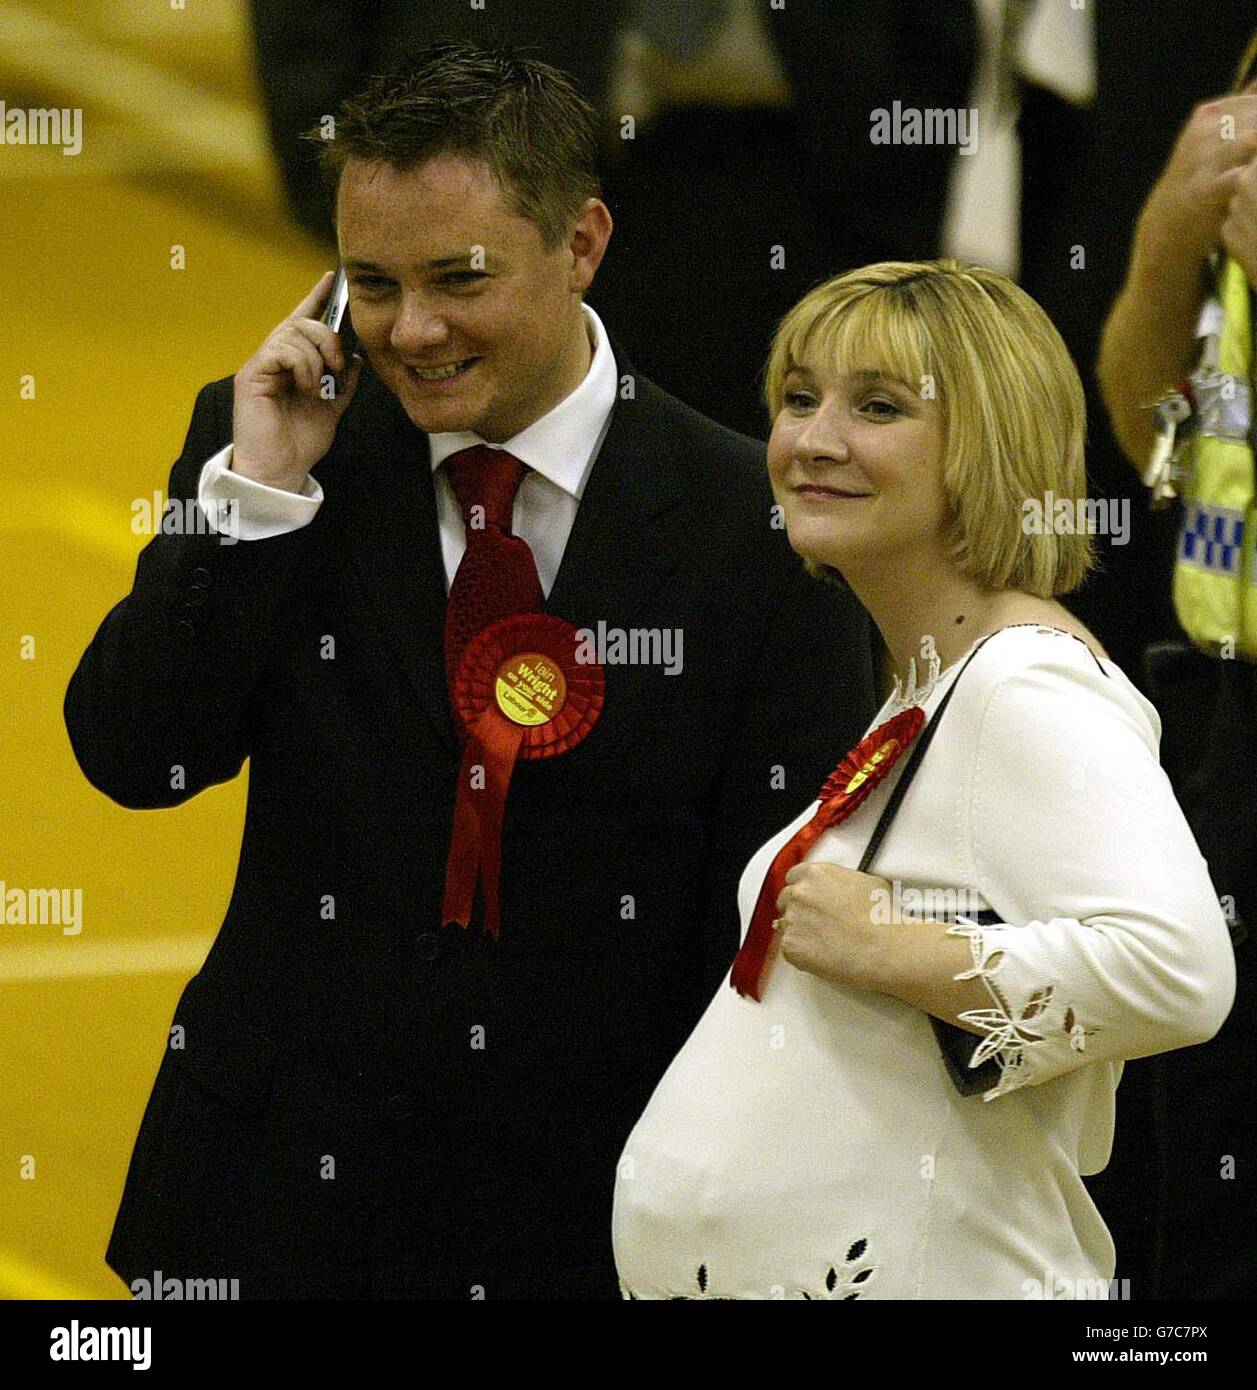 Victorious Labour candidate Iain Wright with his wife before the announcement that he won the Hartlepool by-election by some 2,000 voters from Liberal Democrat Jody Dunn, who ran him close second. The UKIP candidate Stephen Allison finished in third place while the Conservative candidate Jeremy Middleton finished in fourth. The seat became vacant when former Cabinet Minister Peter Mandelson resigned to become a European Commissioner. Stock Photo